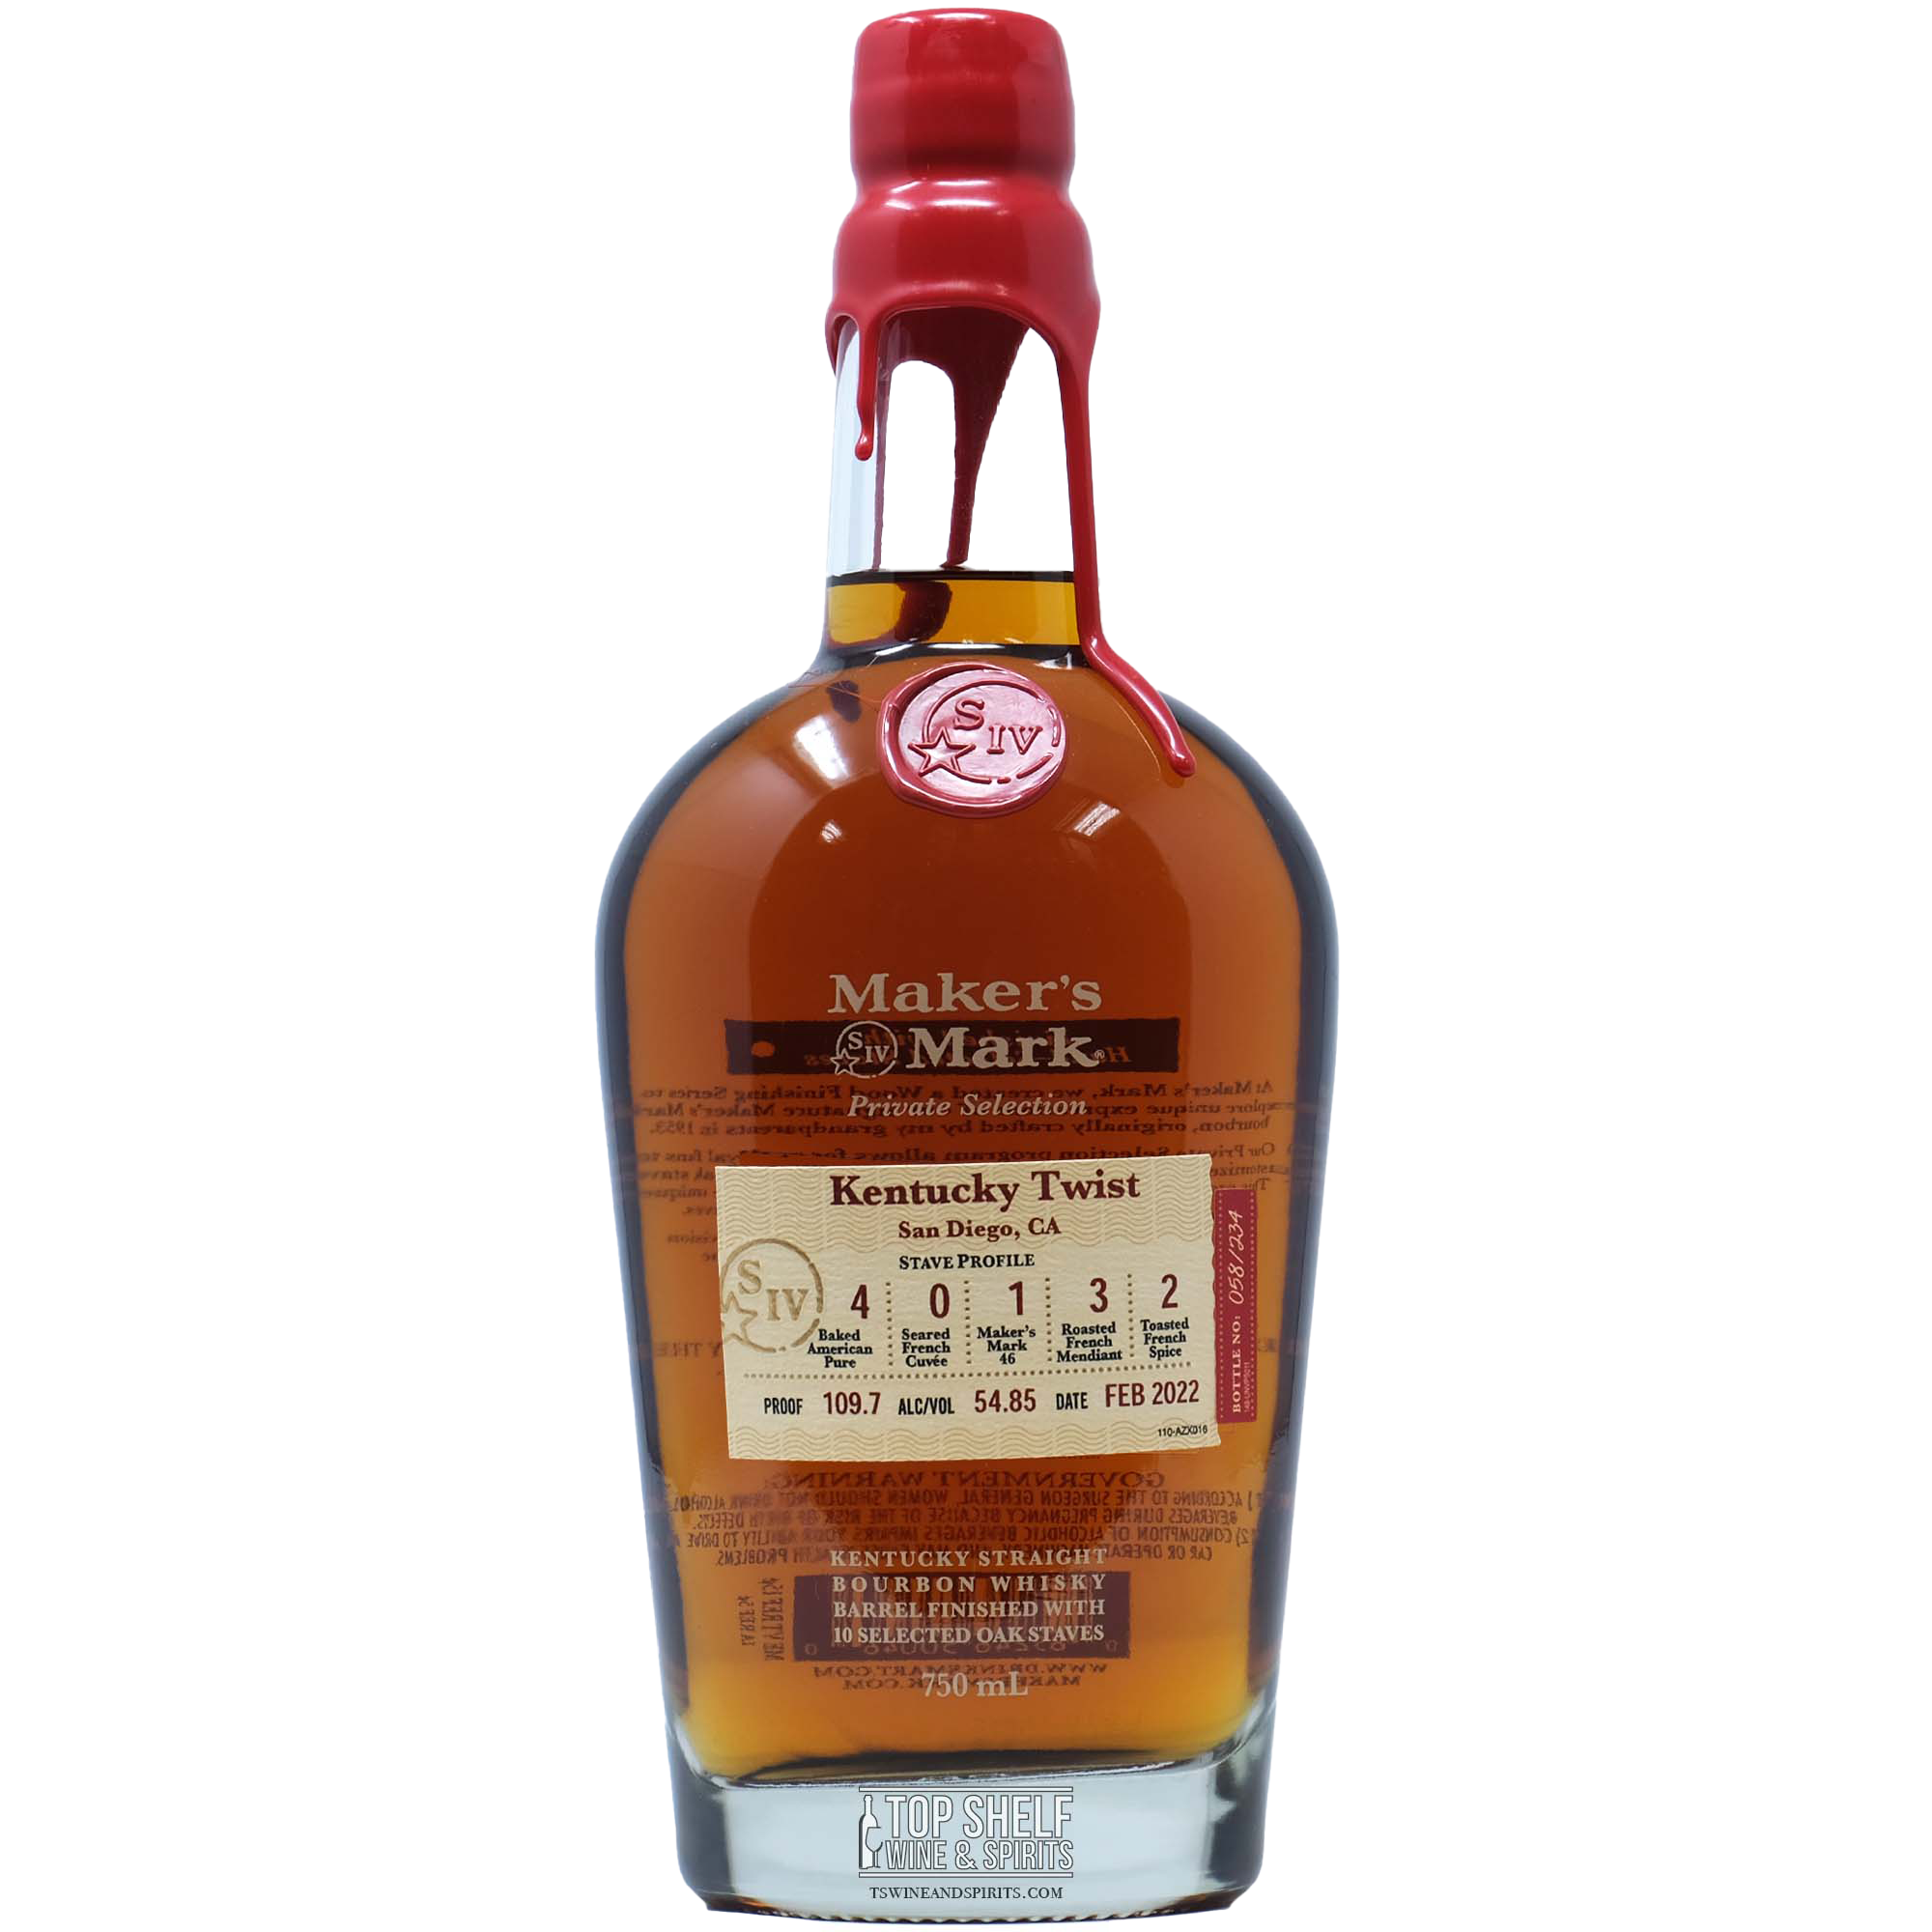 Maker's Mark Private Selection "Kentucky Twist" Bourbon (Private Selection)